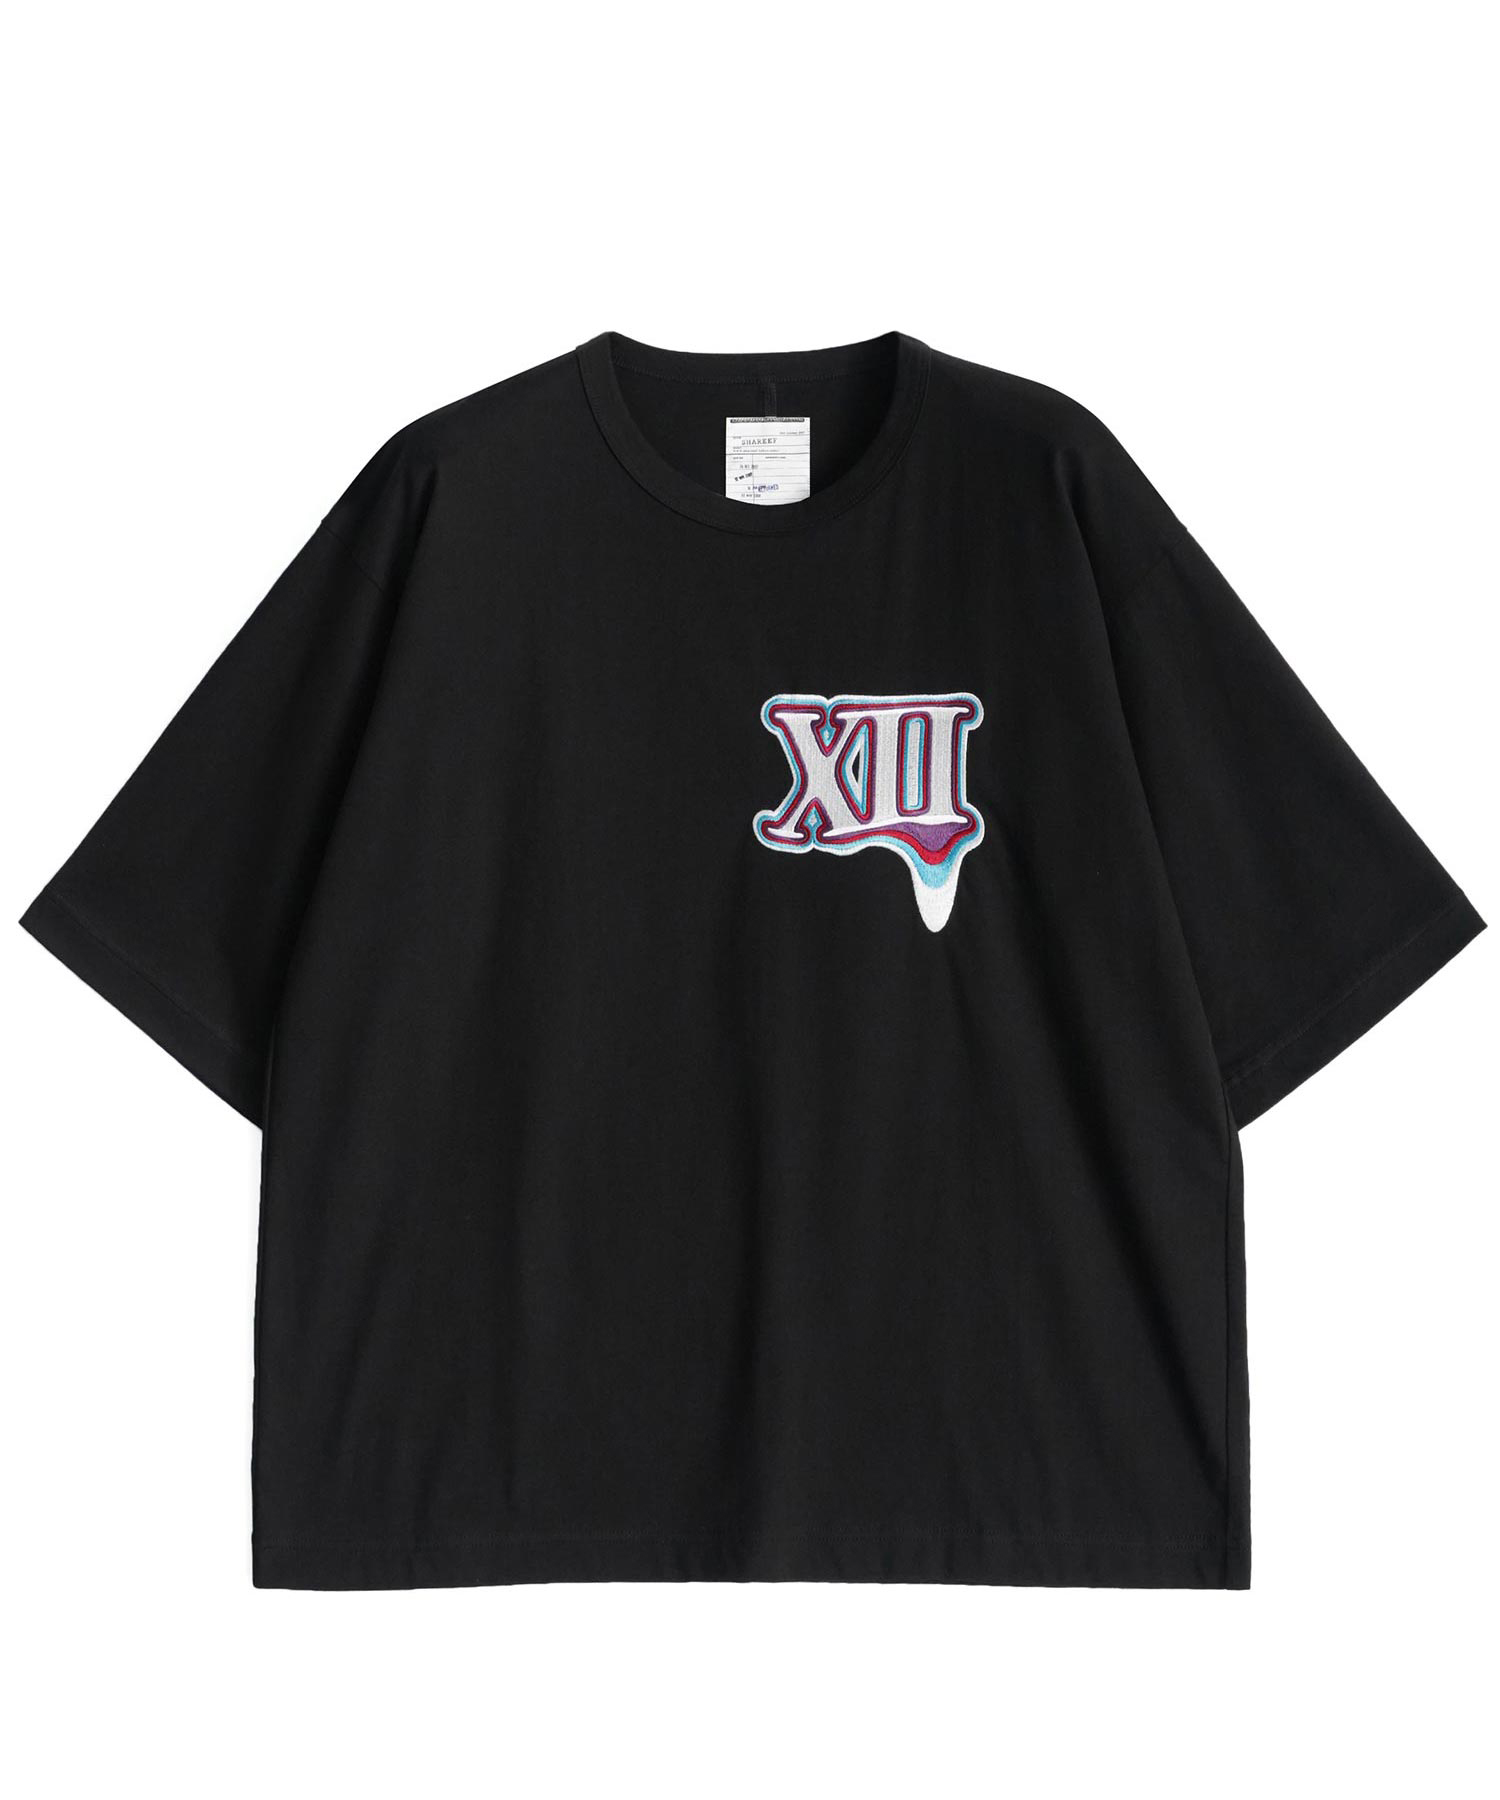 "MELTED XII" S/S BIG-T